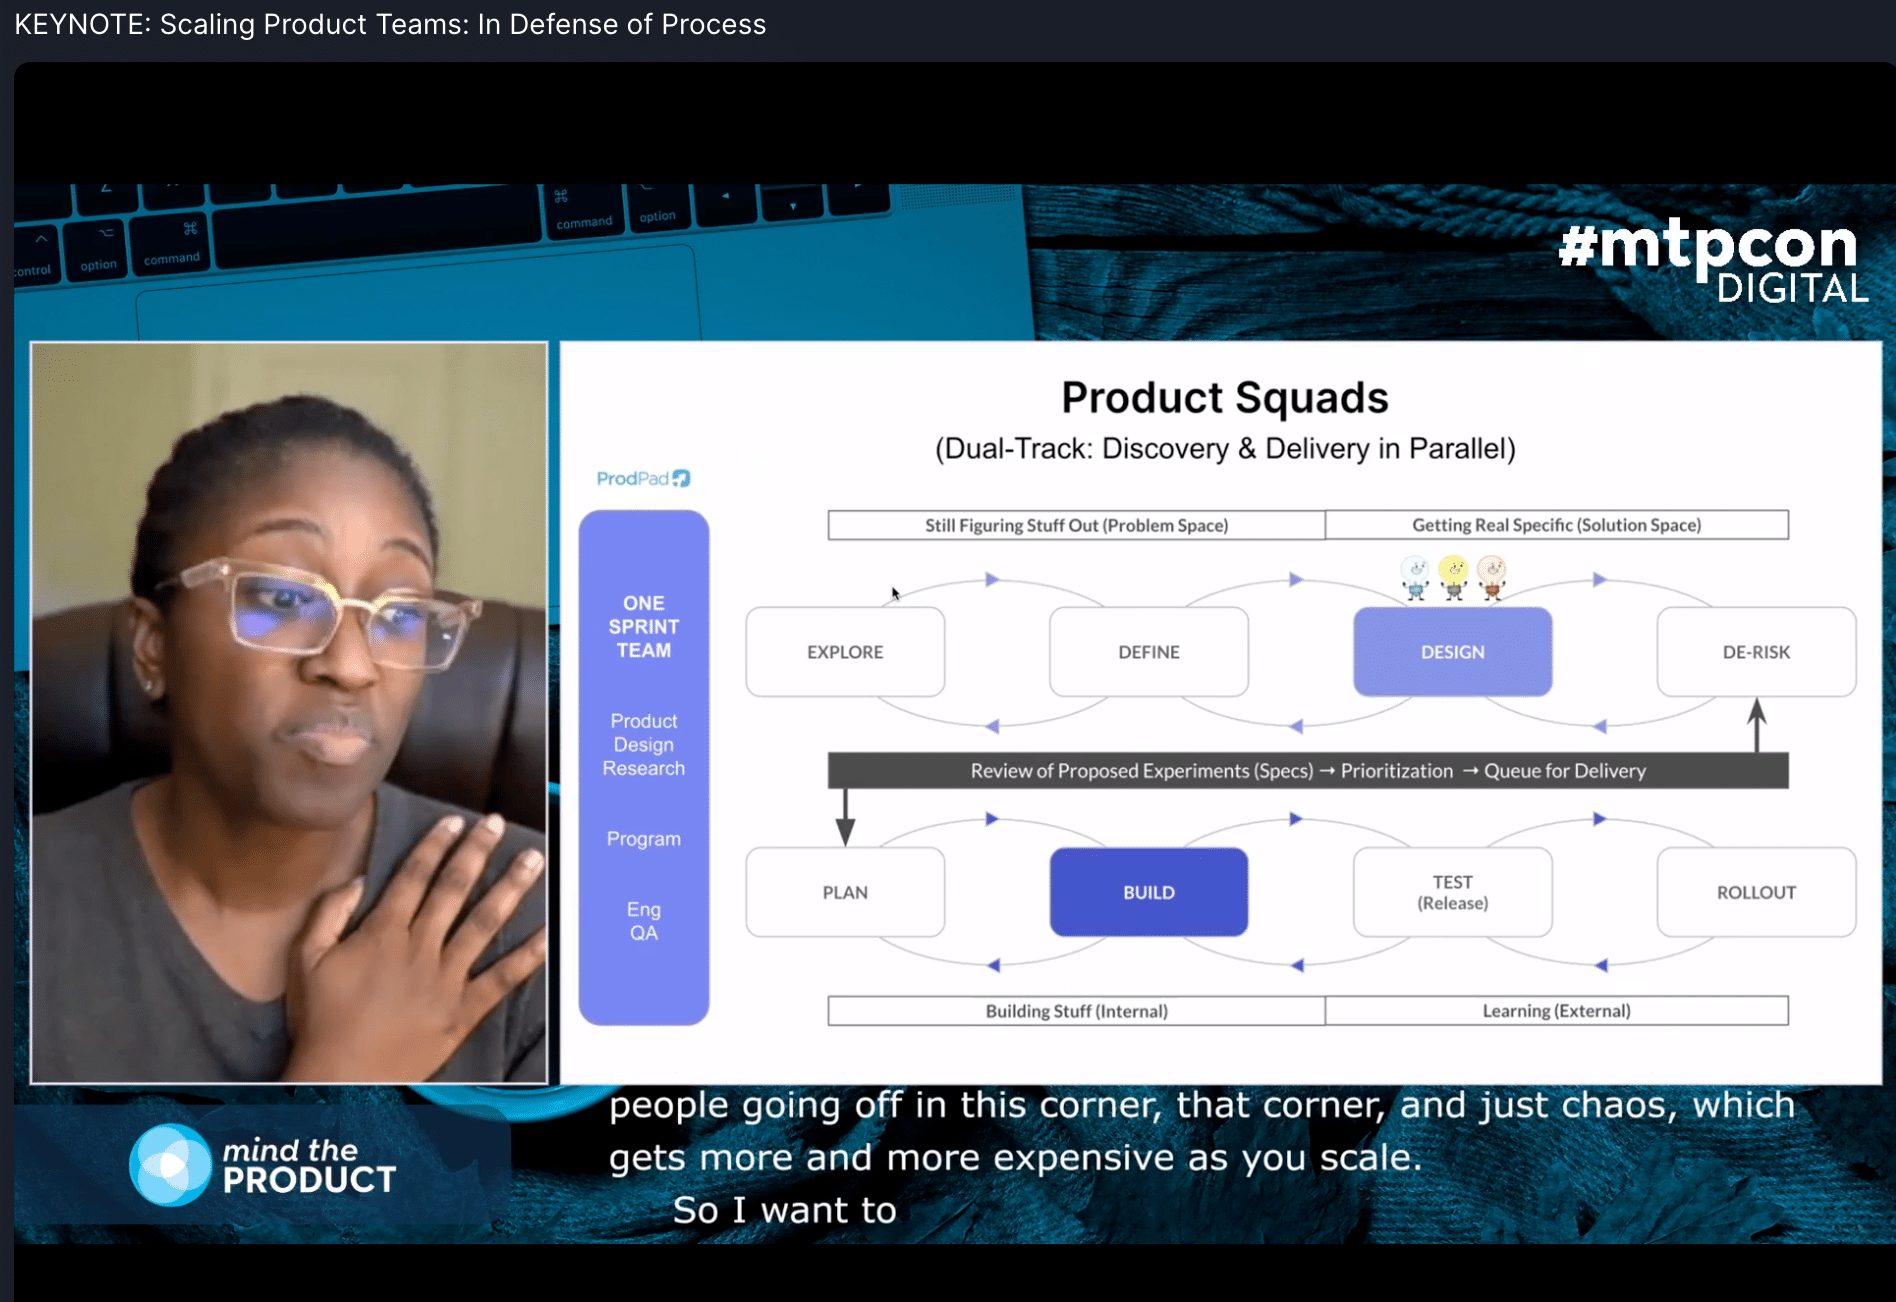 Great to see ProdPad getting a shoutout on how useful it's been as a discovery tool for growing product teams.